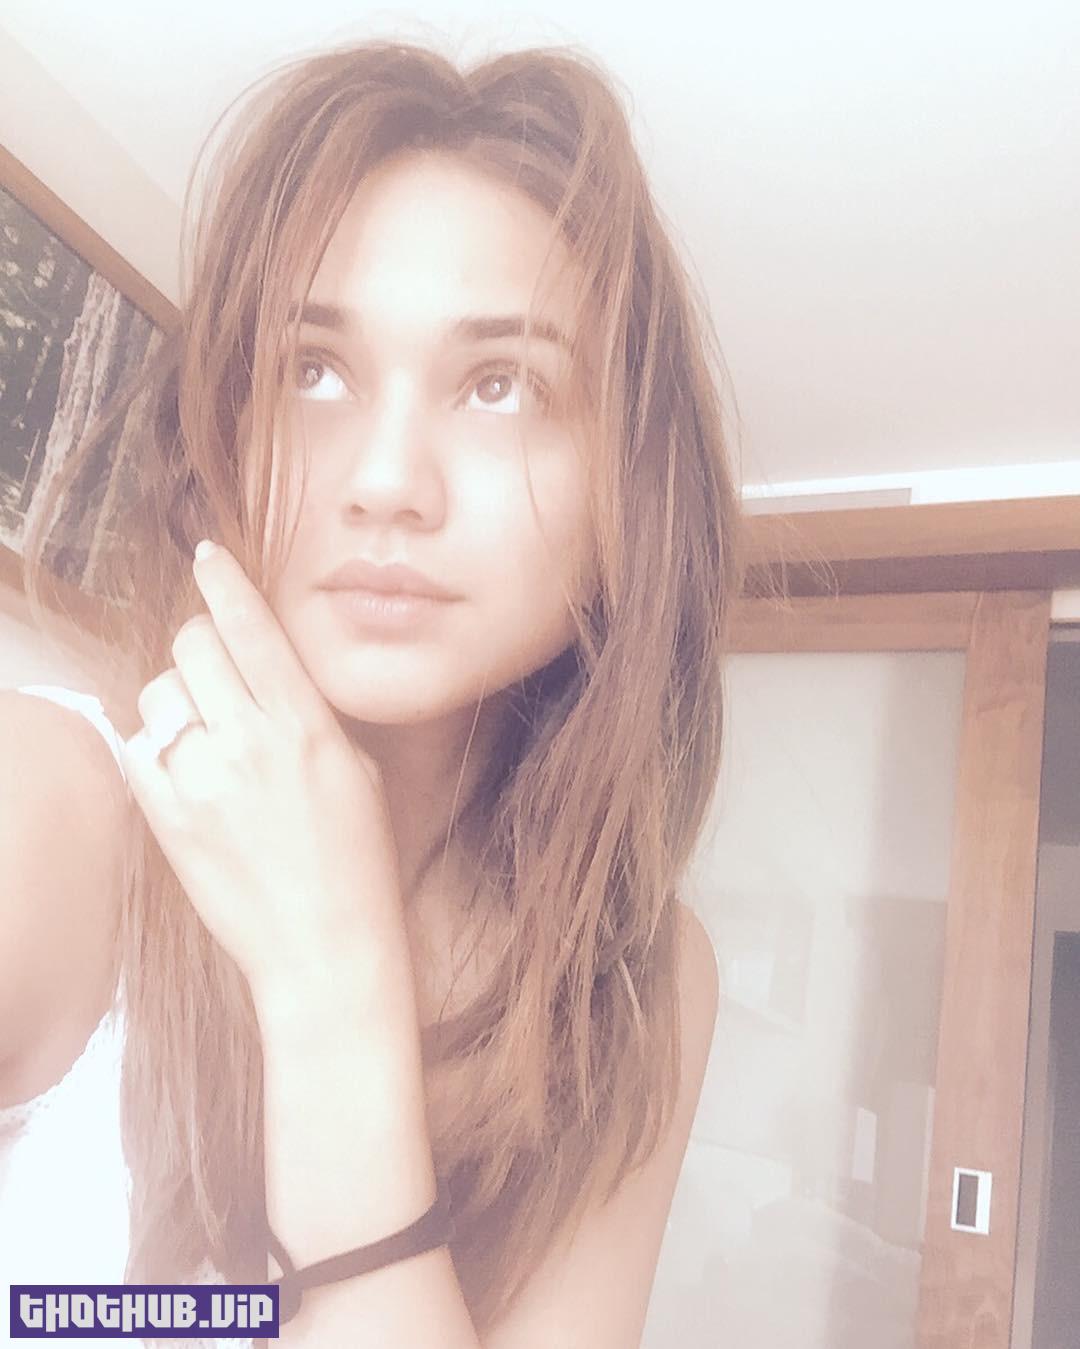 1698324336 603 Summer Bishil The Fappening Sexy Selfies 39 Photos